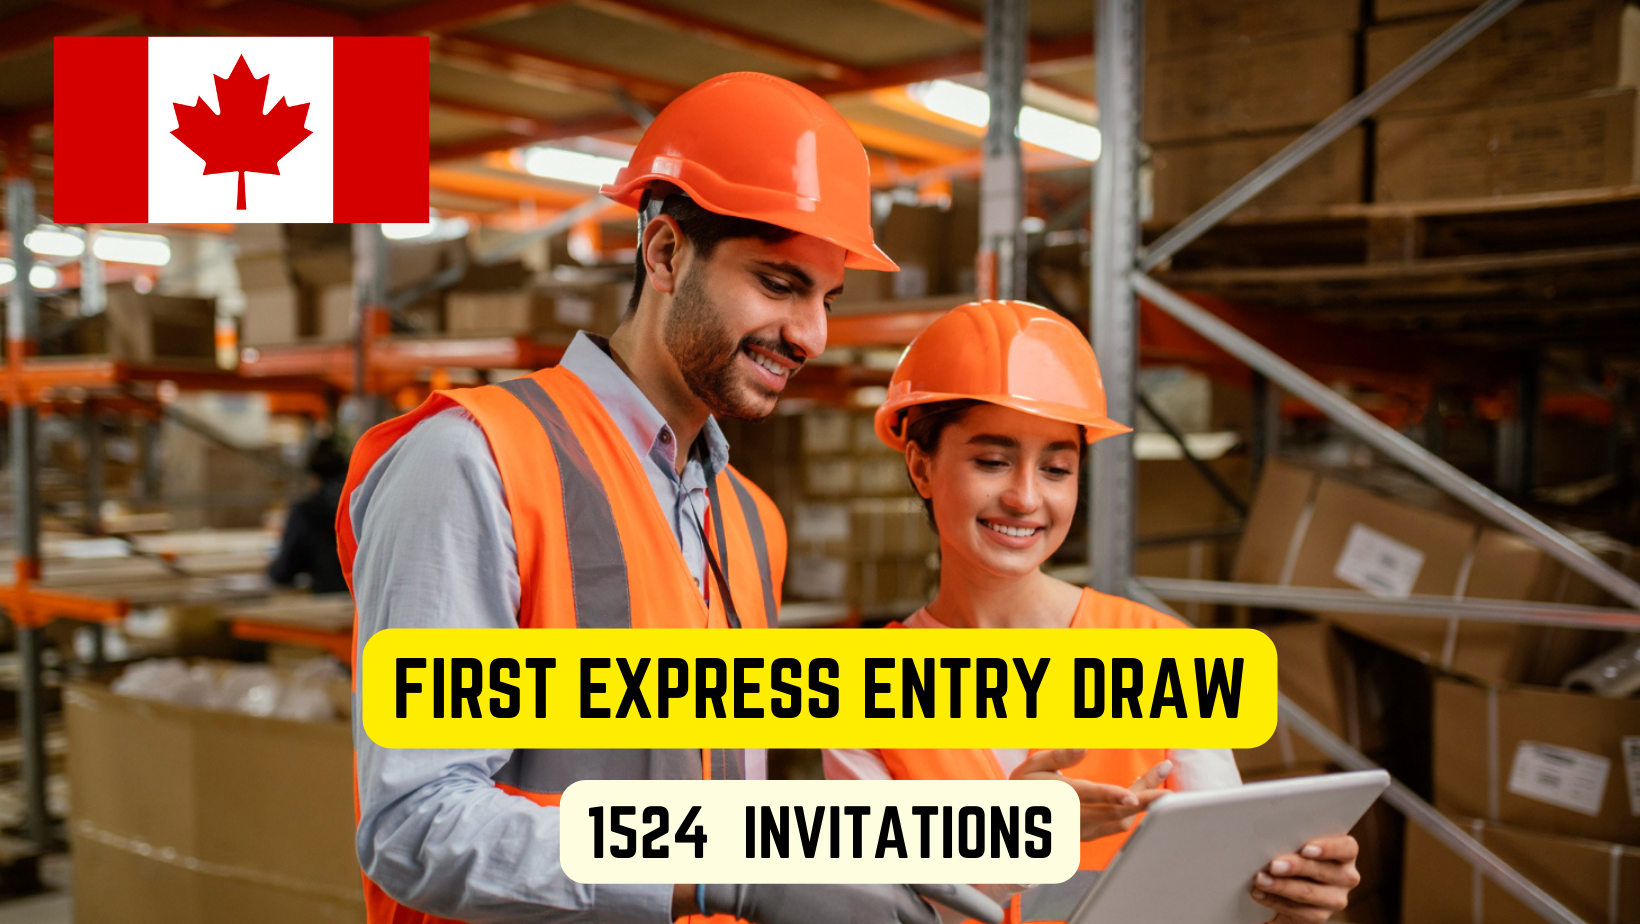 Canada kicked off the first express entry draw of the year with 1524 invitations